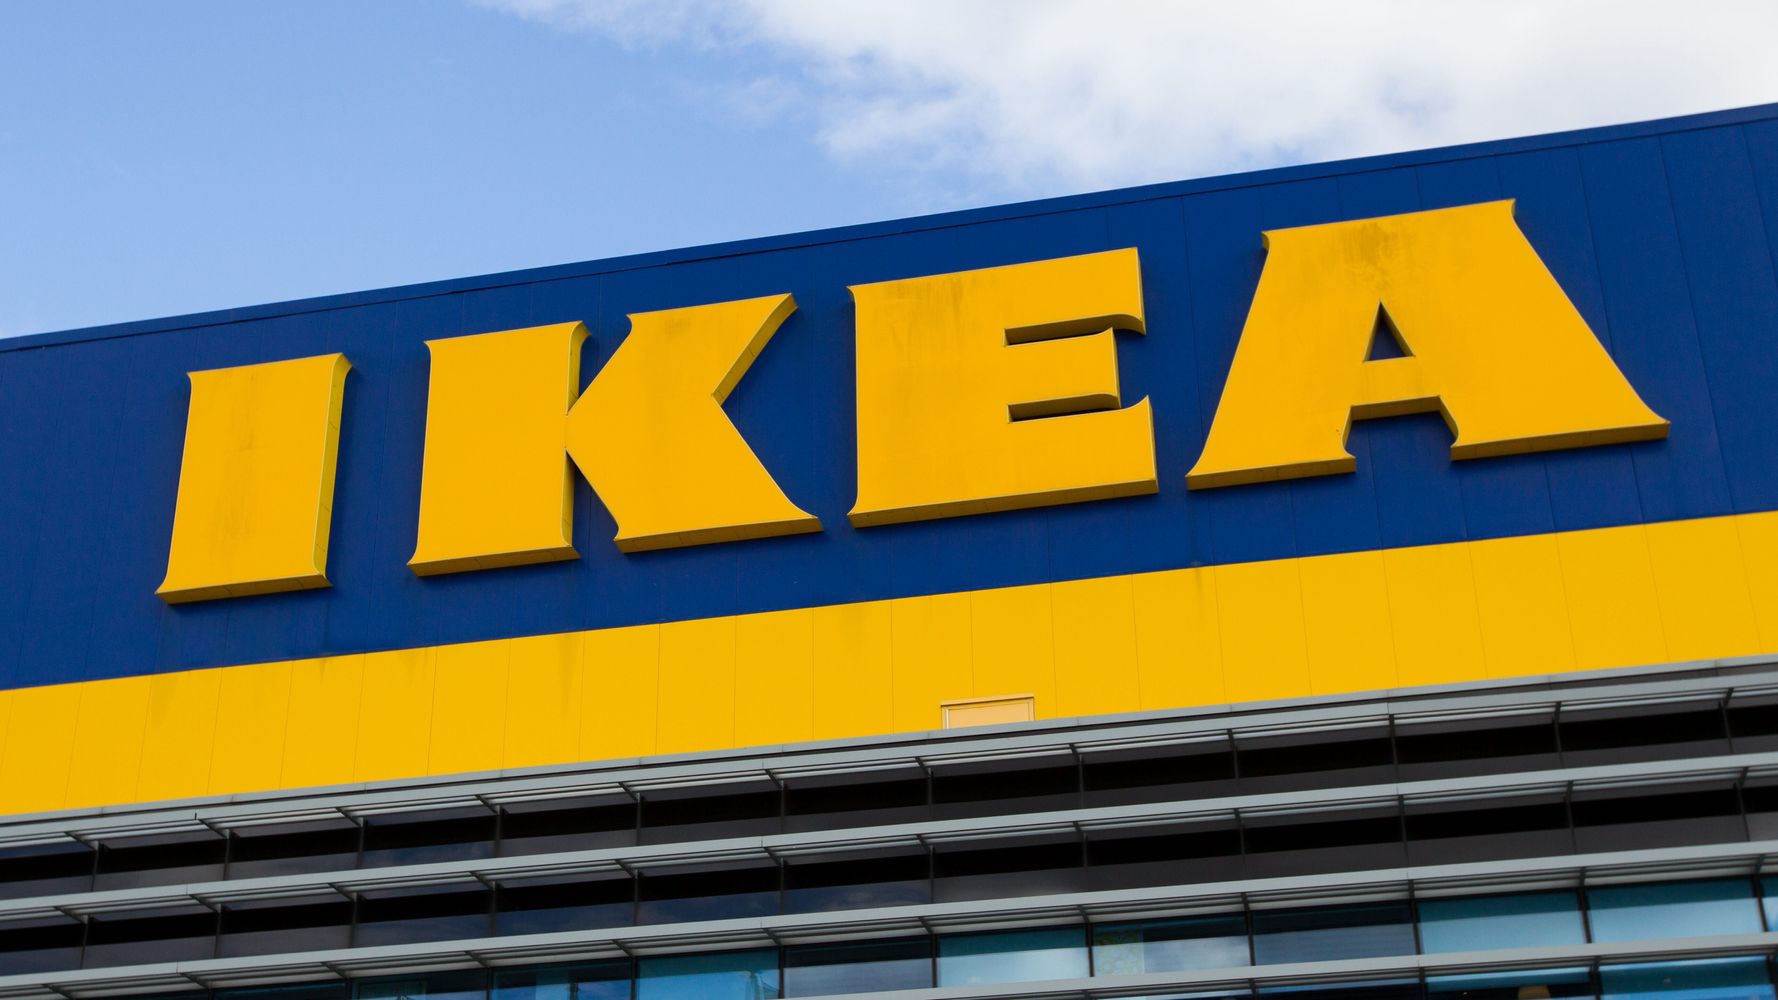 Ikea Canada's Sell-Back Service Will Buy Your Gently Used Furniture